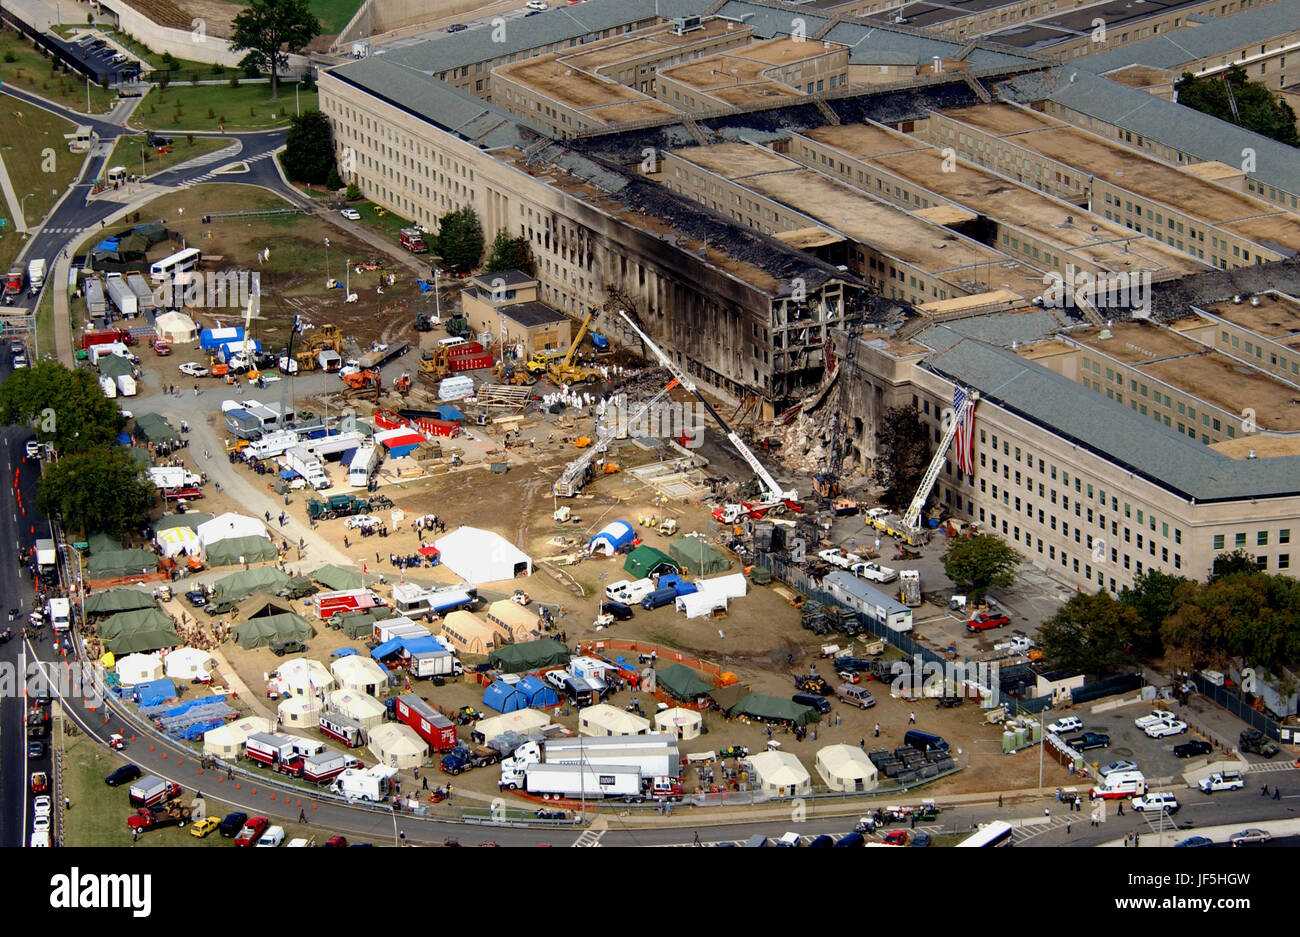 0 1 0 9 1 4 - F - 8 0 0 6 R - 0 0 5    FBI agents, fire fighters, rescue workers and engineers work at the Pentagon crash site on Sept. 14, 2001, where a high-jacked American Airlines flight slammed into the building on Sept. 11.  The terrorist attack caused extensive damage to the west face of the building and followed similar attacks on the twin towers of the World Trade Center in New York City.   DoD photo by Tech. Sgt. Cedric H. Rudisill. Stock Photo